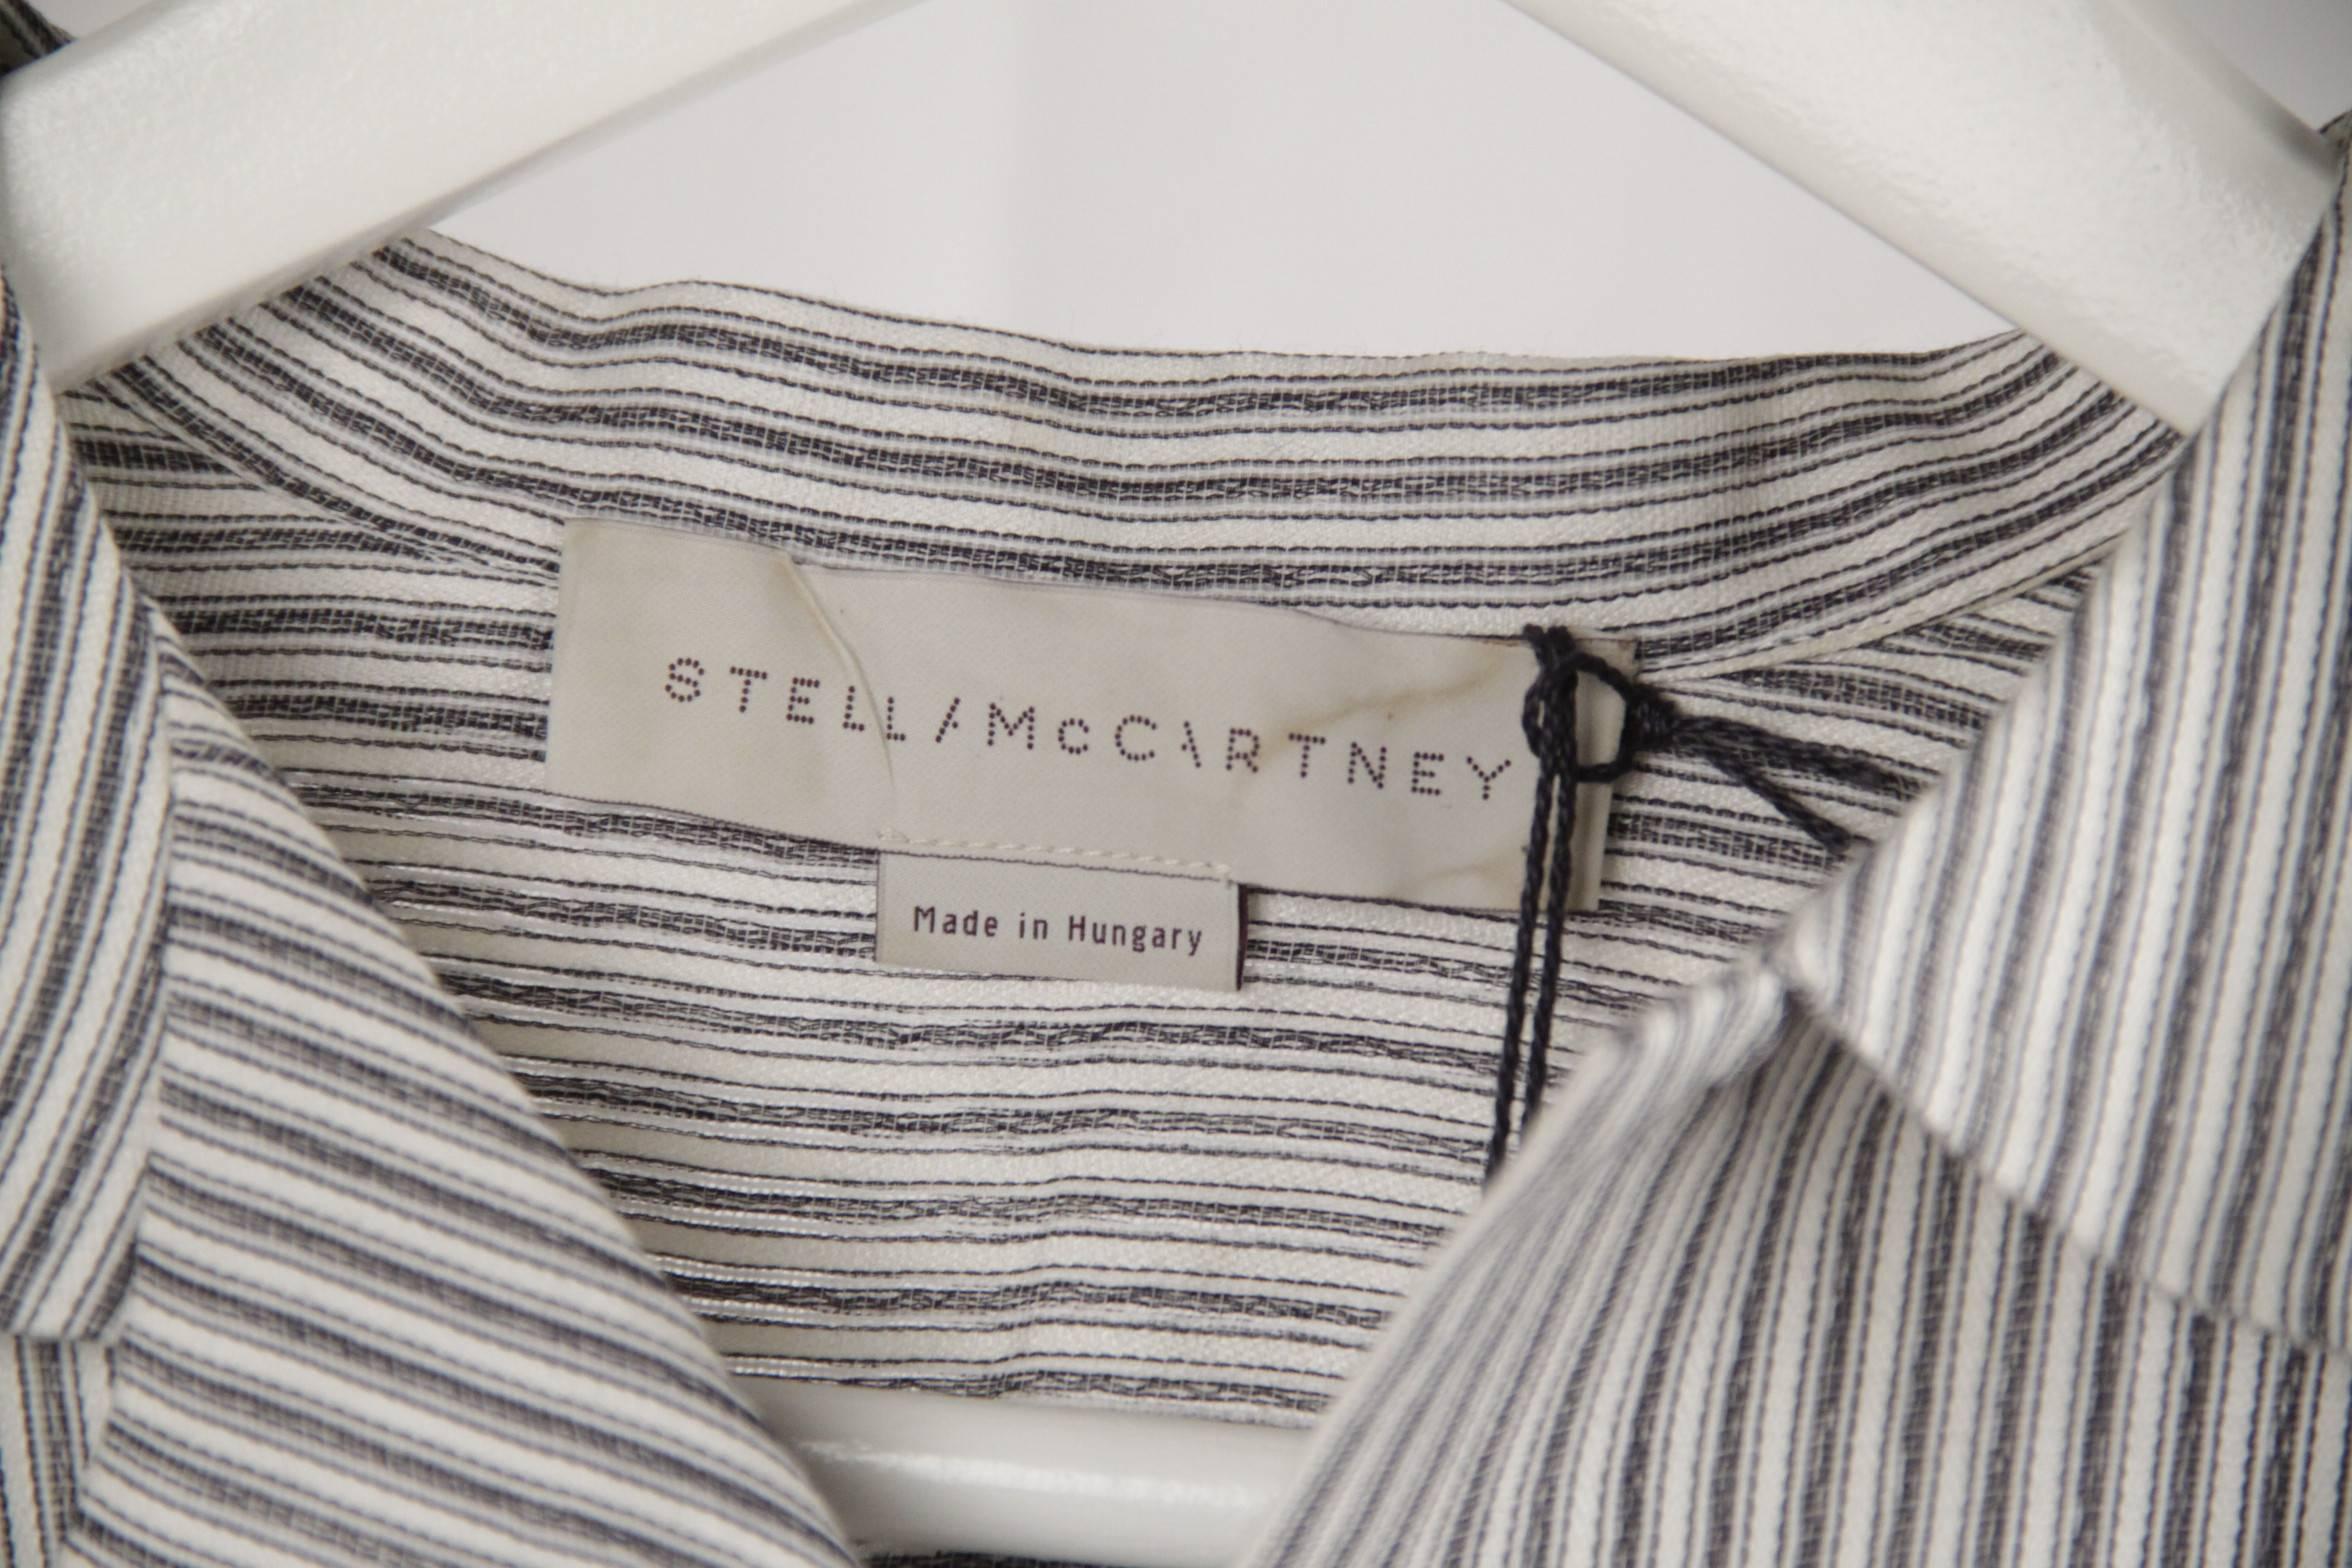 - STELLA McCARTNEY Striped Cotton & Silk set

- Short sleeve Shirt

- Front button closure on the front

- Shorts with concealed hook & bar & zip closure on the front

- Belt loops

- Composition: 84% Cotton, 16% Silk

- Size : 38 IT